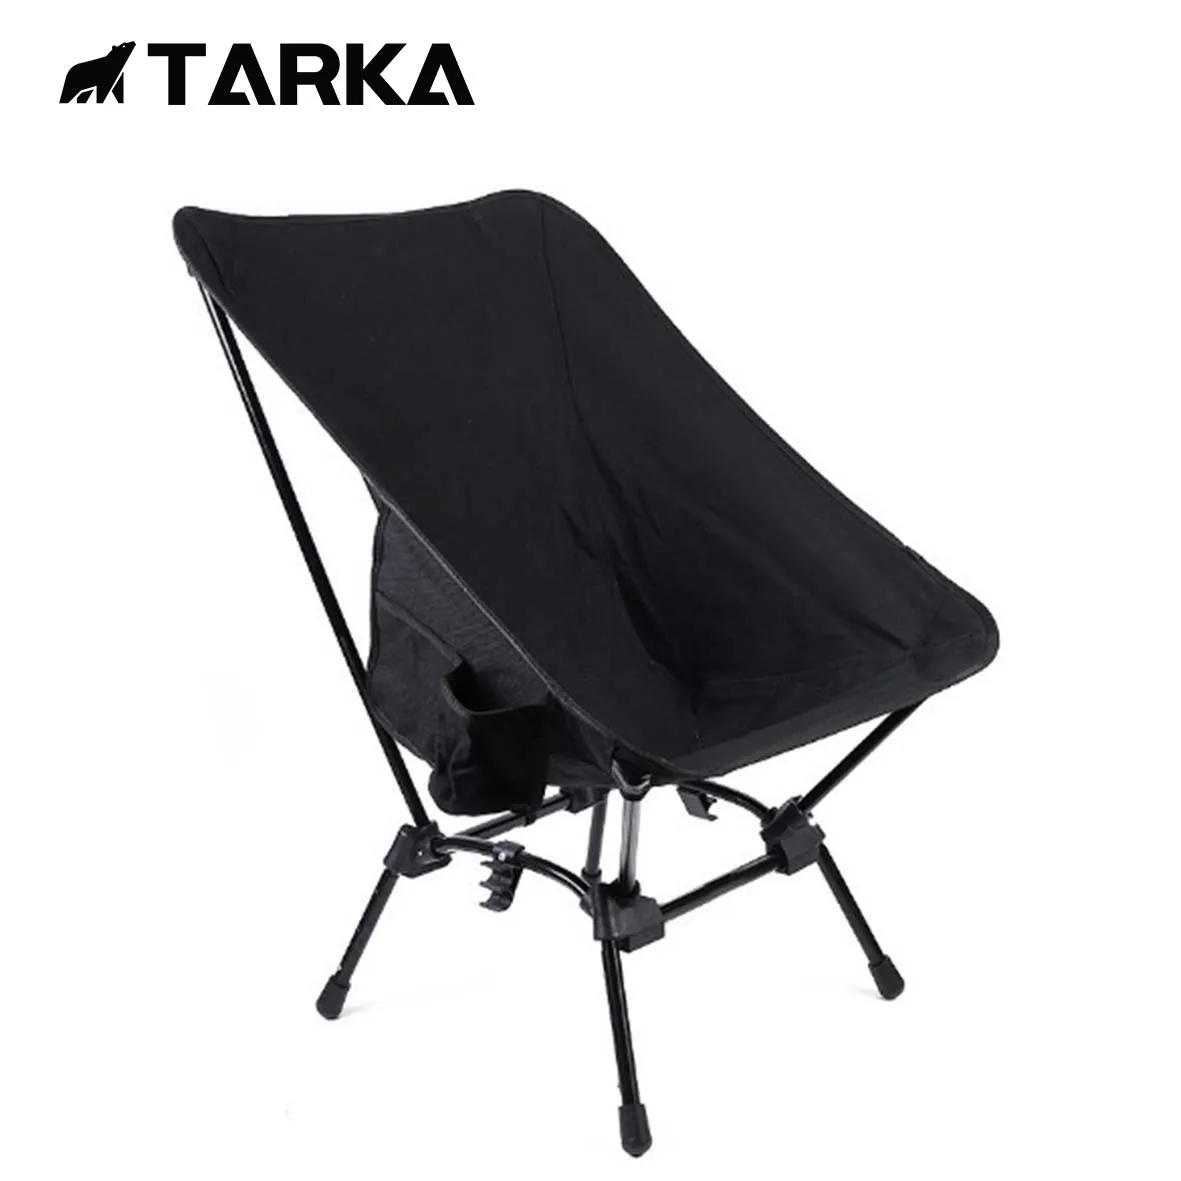 

TARKA Square Camping Folding Chairs Adjustable Heights Foldable Chair Backrest Fishing Chairs Tourist Lightweight Moon Chair